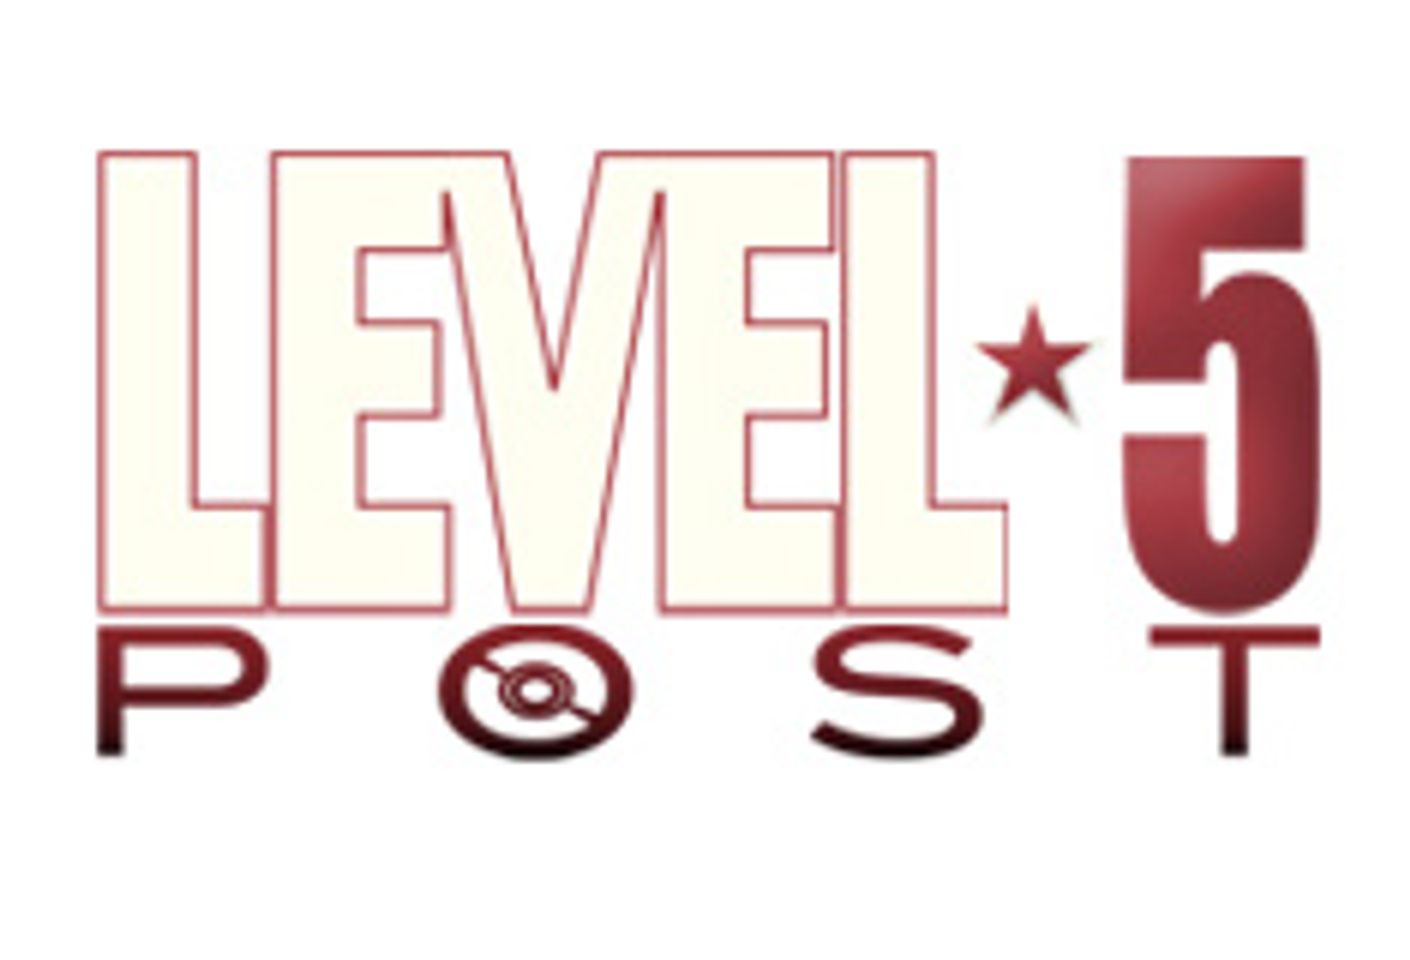 Claudia Ross Named General Manager of Level 5 Post